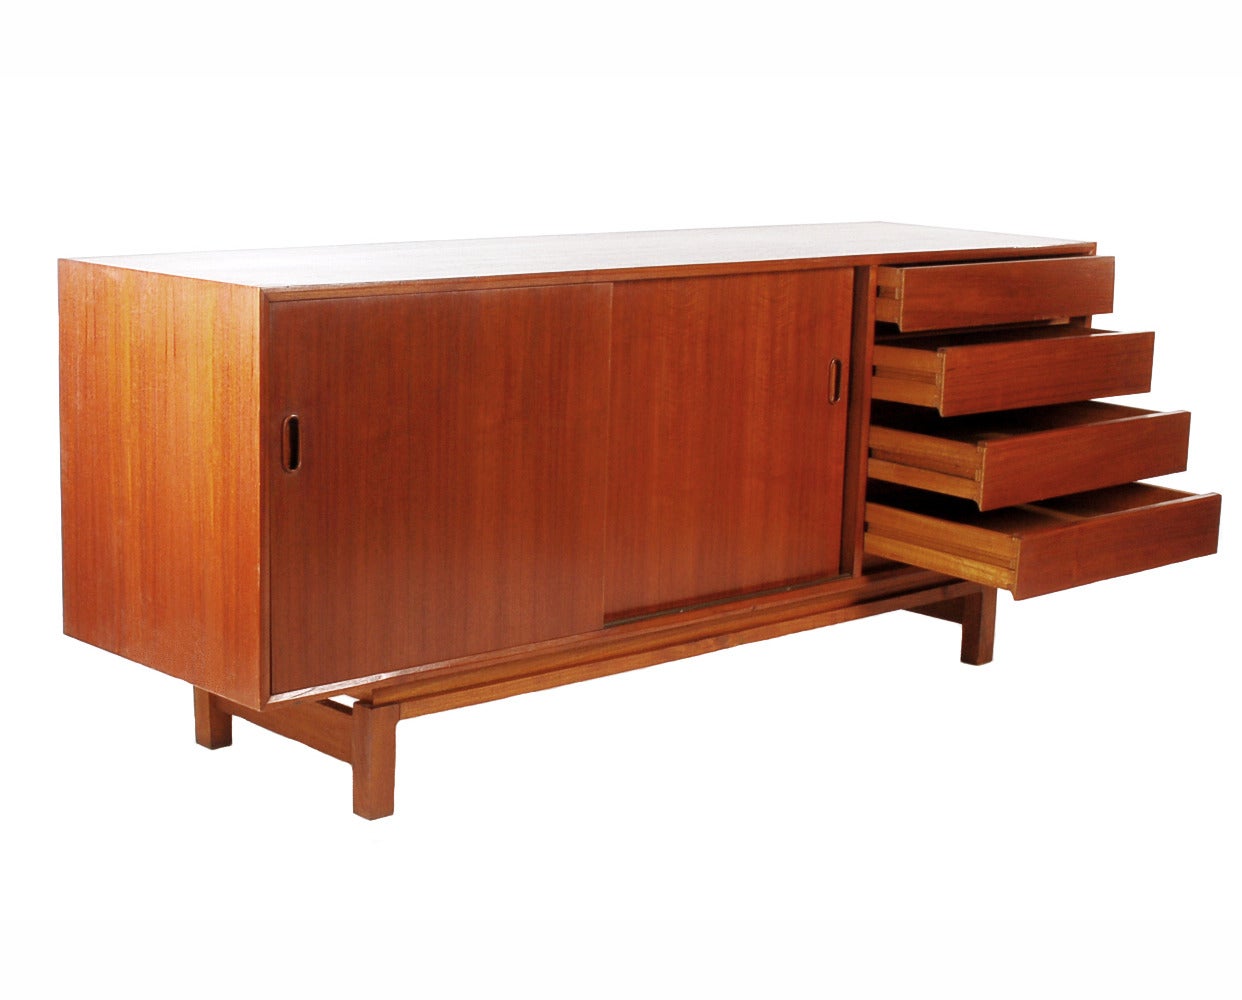 A beautifully constructed teak sideboard circa 1960s. Very clean design lines and provides lots of interior storage.

In the style of: Kai Kristensen or Neils Moller.